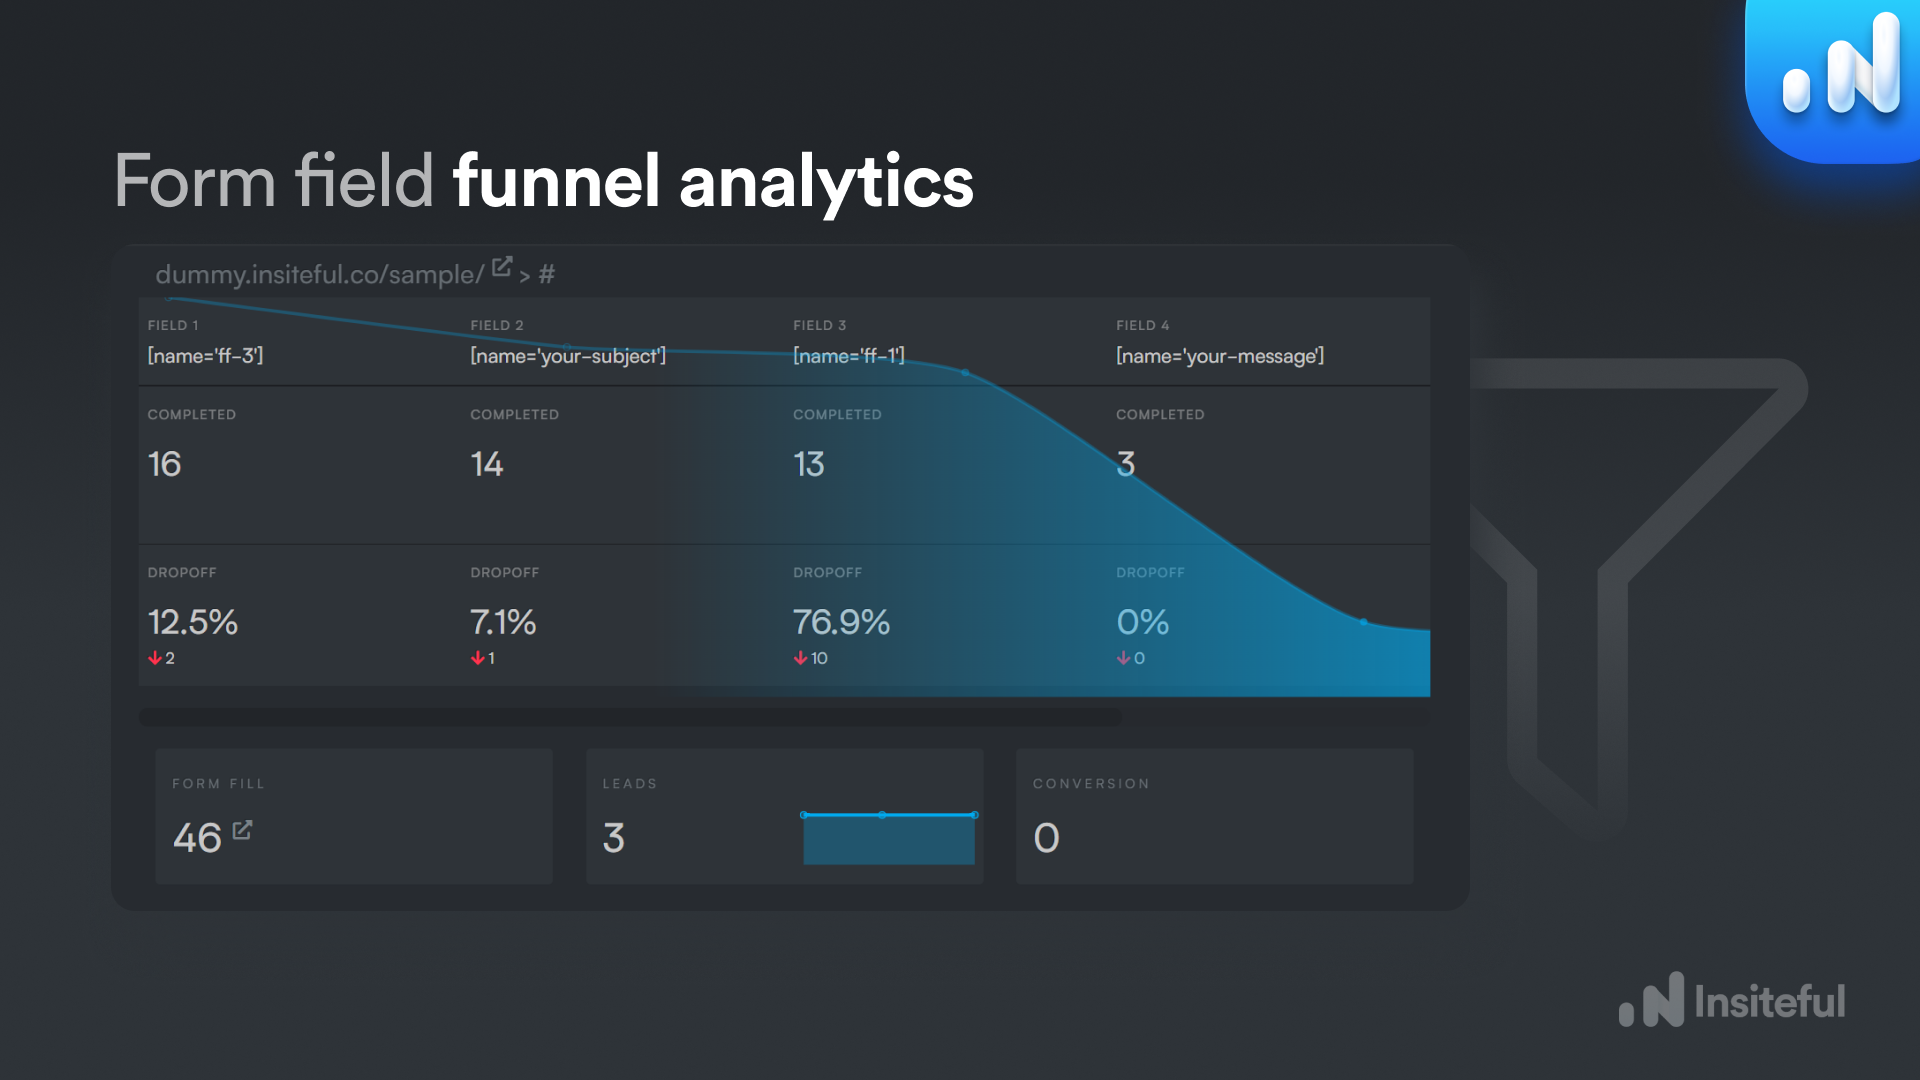 Smart form field recommendations & funnel analytics: Insiteful.co